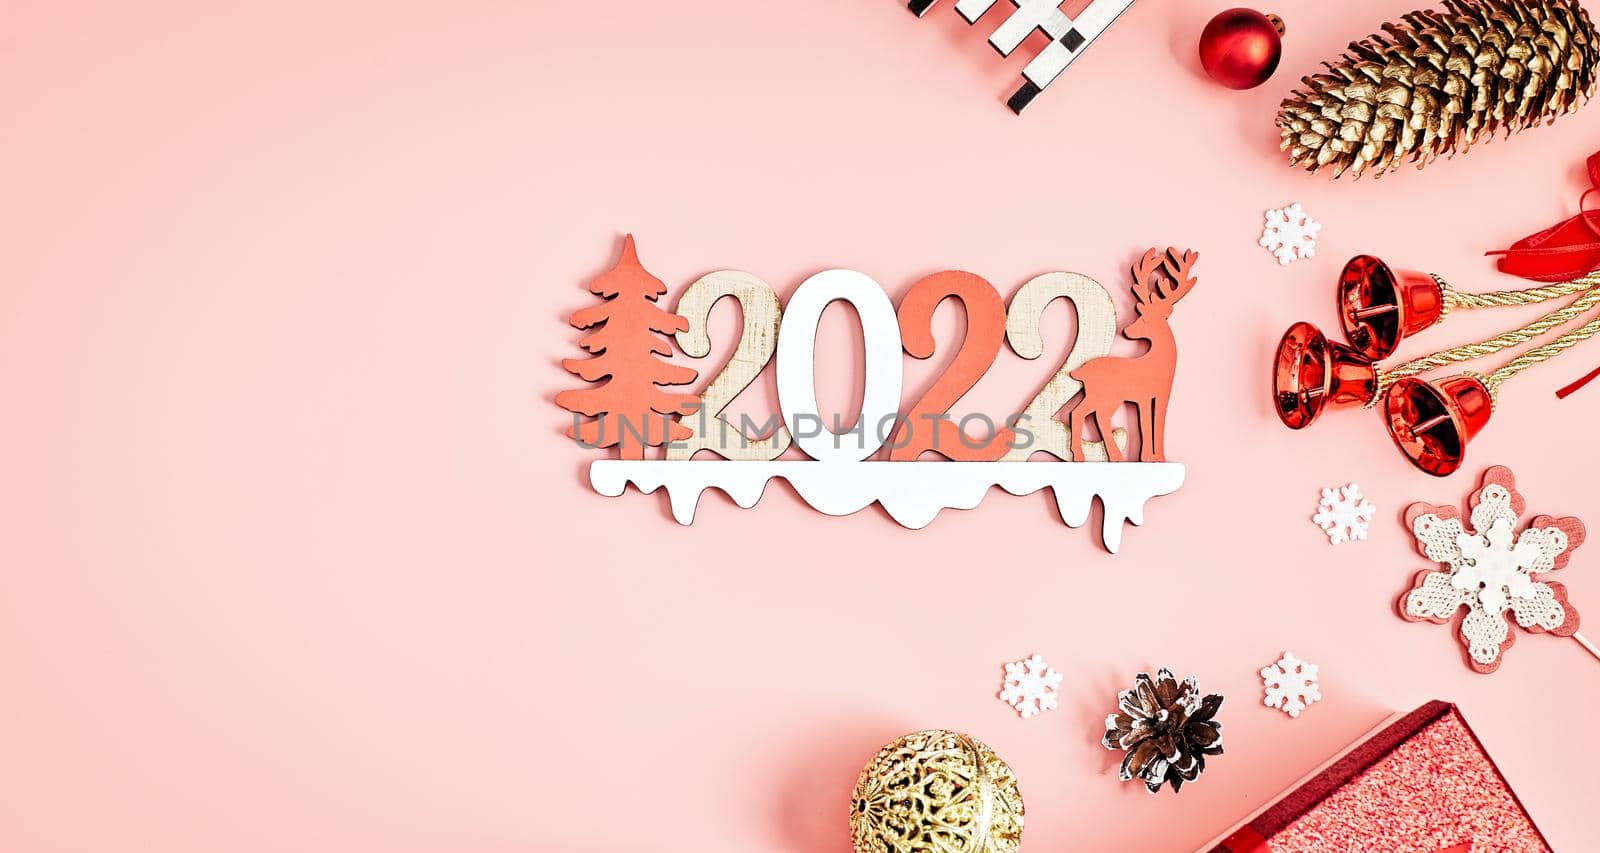 Happy New Year holiday concept. New Year decorations,  tree, snowflake, pine cone, gifts on  background. Holiday party greeting card mockup with copy space. Flat lay, top view, overhead. by Maximusnd